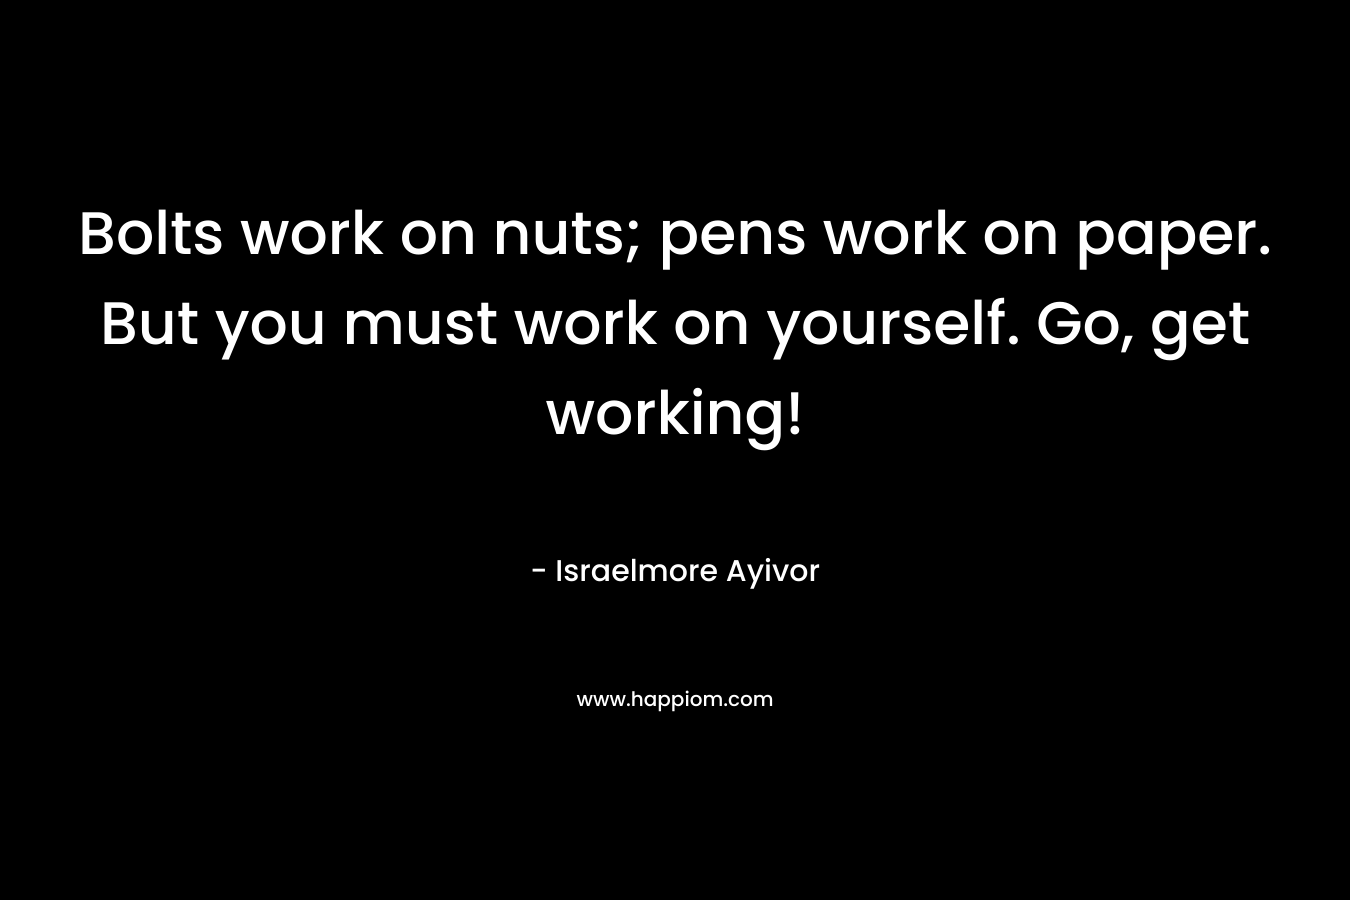 Bolts work on nuts; pens work on paper. But you must work on yourself. Go, get working! – Israelmore Ayivor